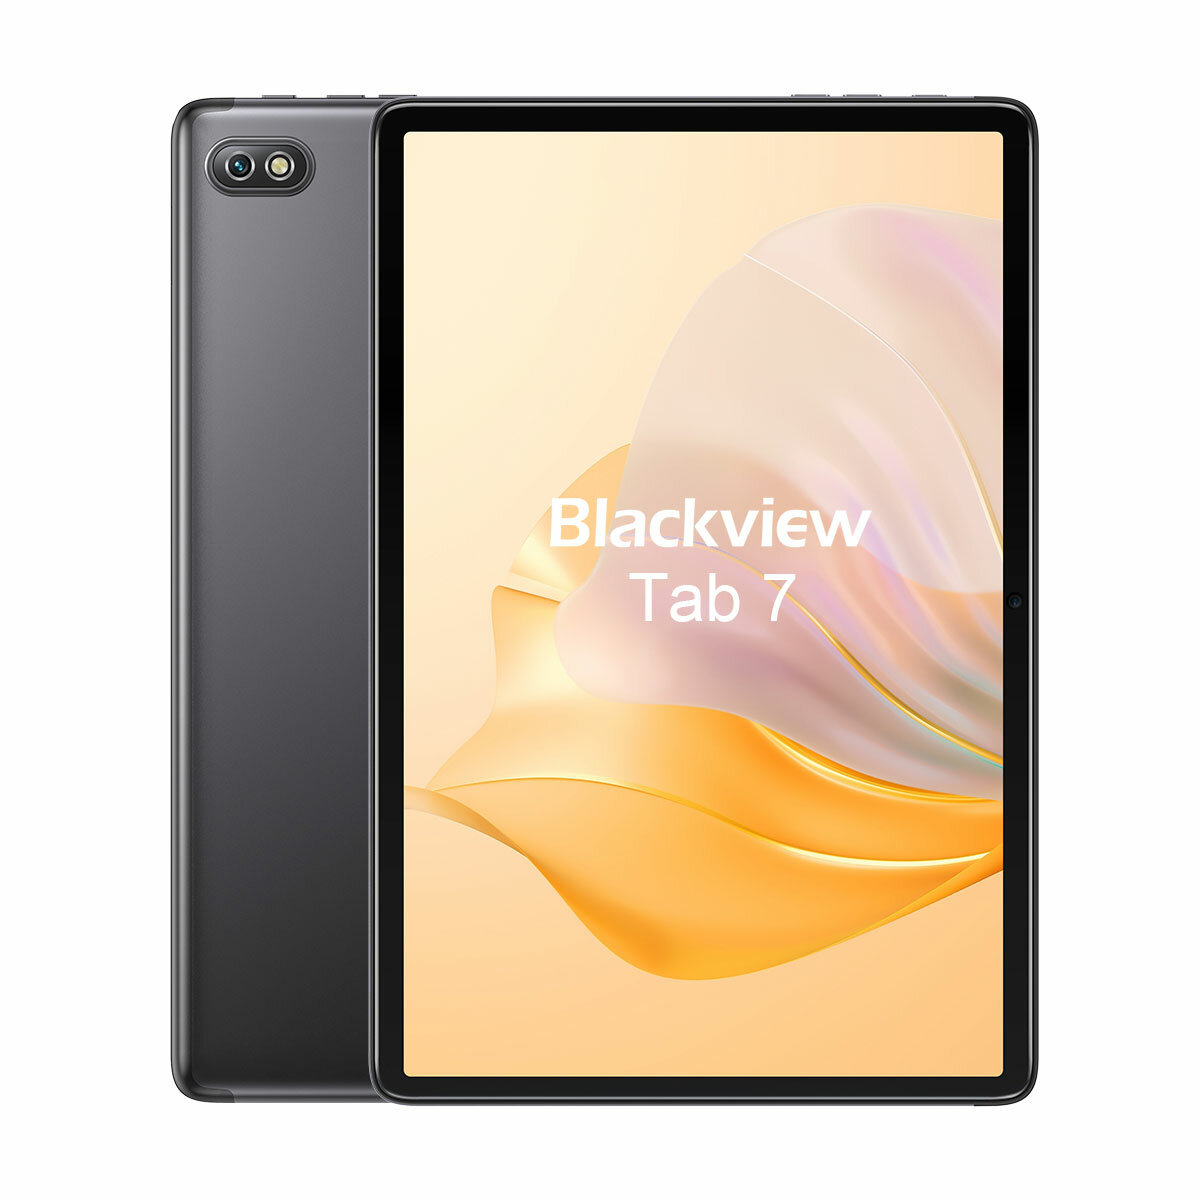 Image of Blackview TAB 7 UNISOC T310 Quad Core 3GB RAM 32GB ROM 101 Inch 4G LTE Android 11 Tablet